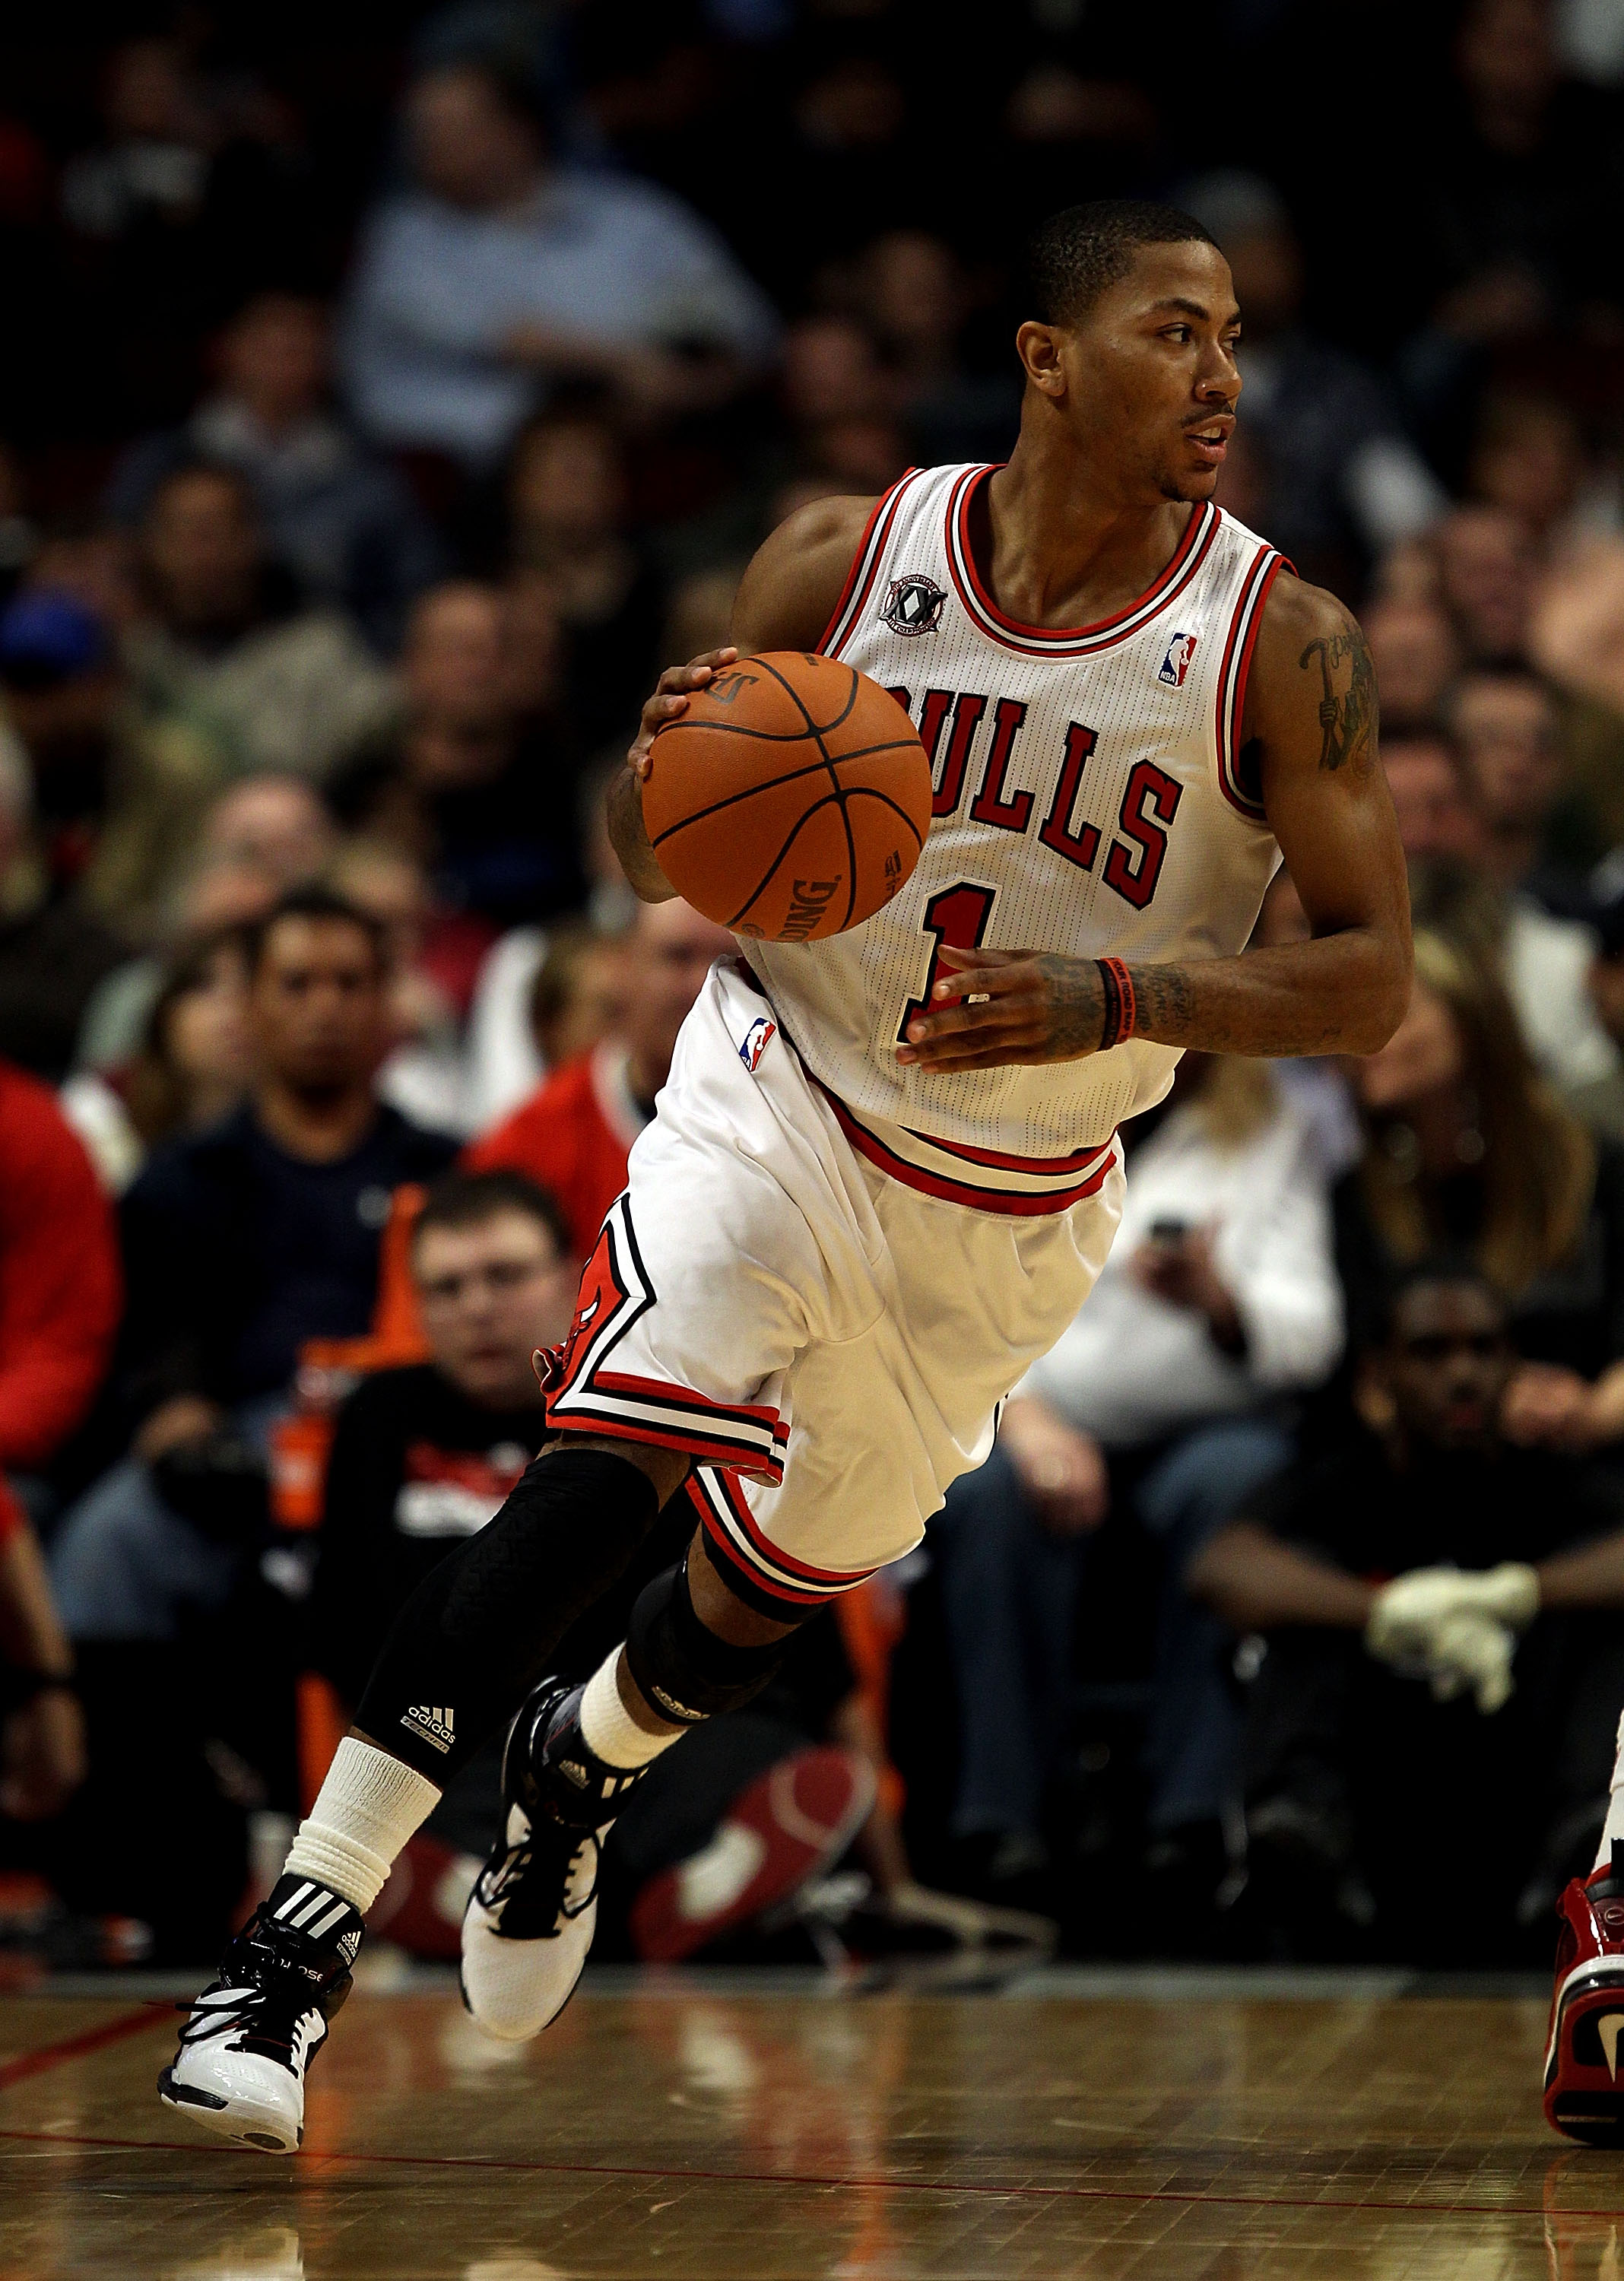 "D" Rose's uses his crossover to render his oppontents "D" fenseless.